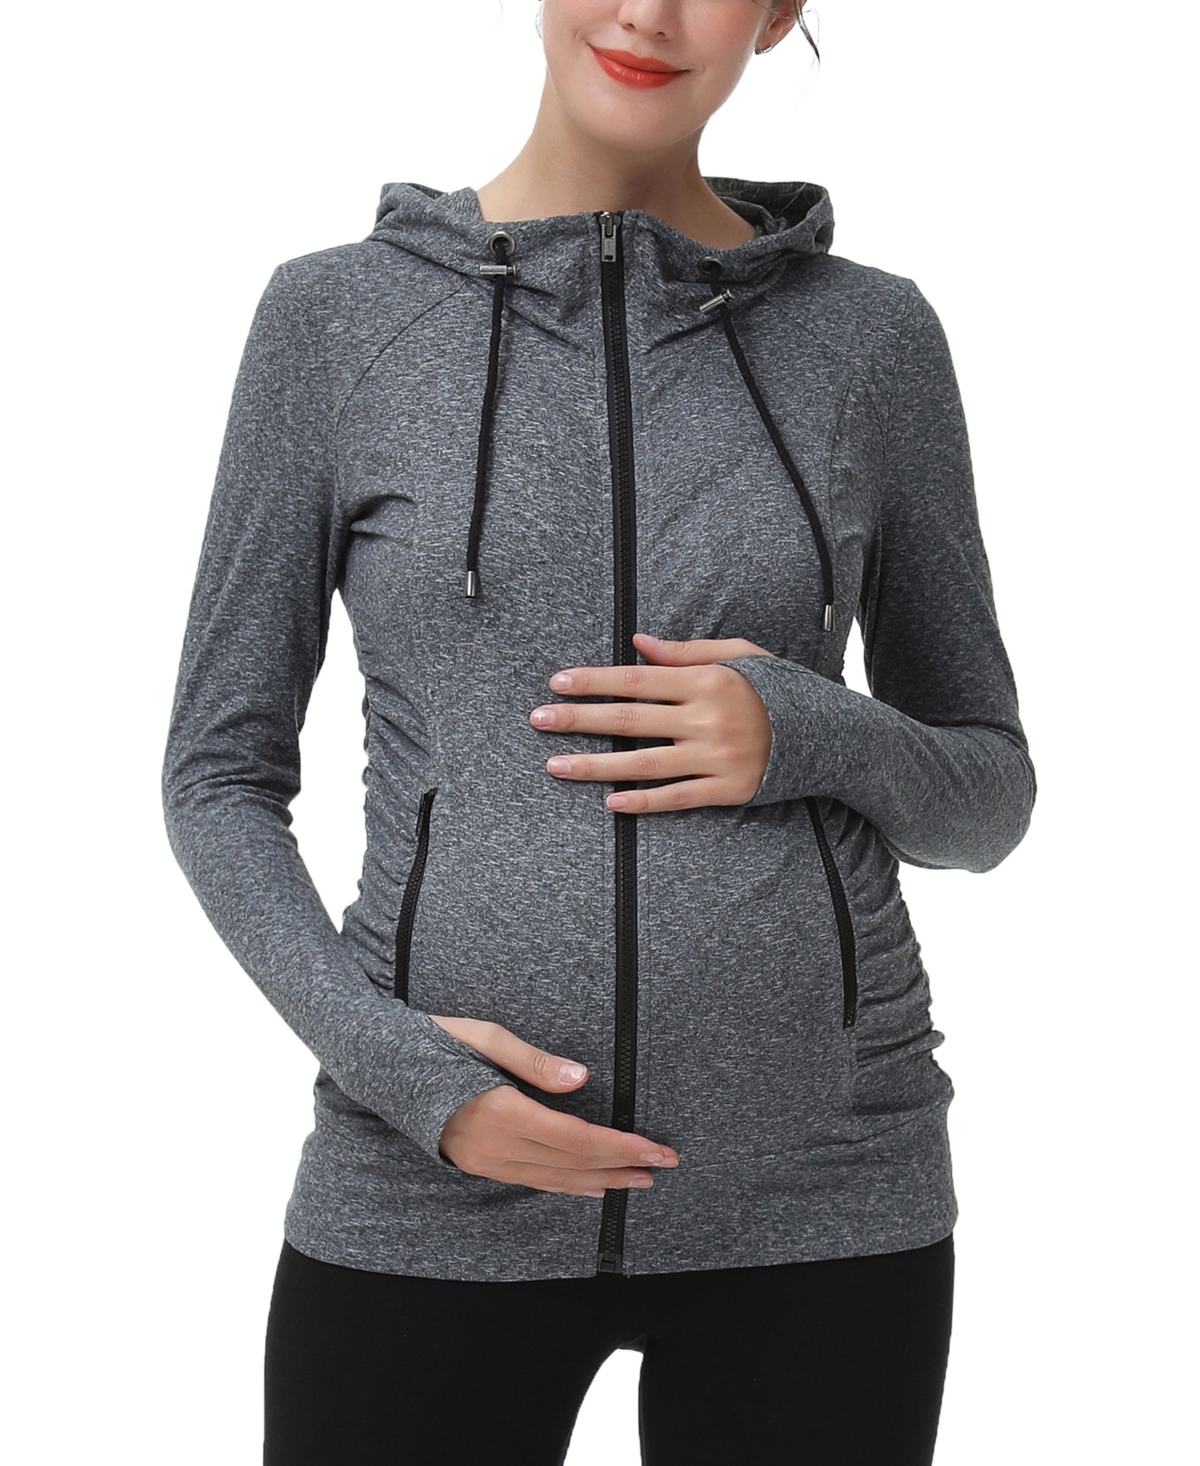 kimi + kai Maternity Essential Ruched Hooded Active Jacket - Dark heather gray